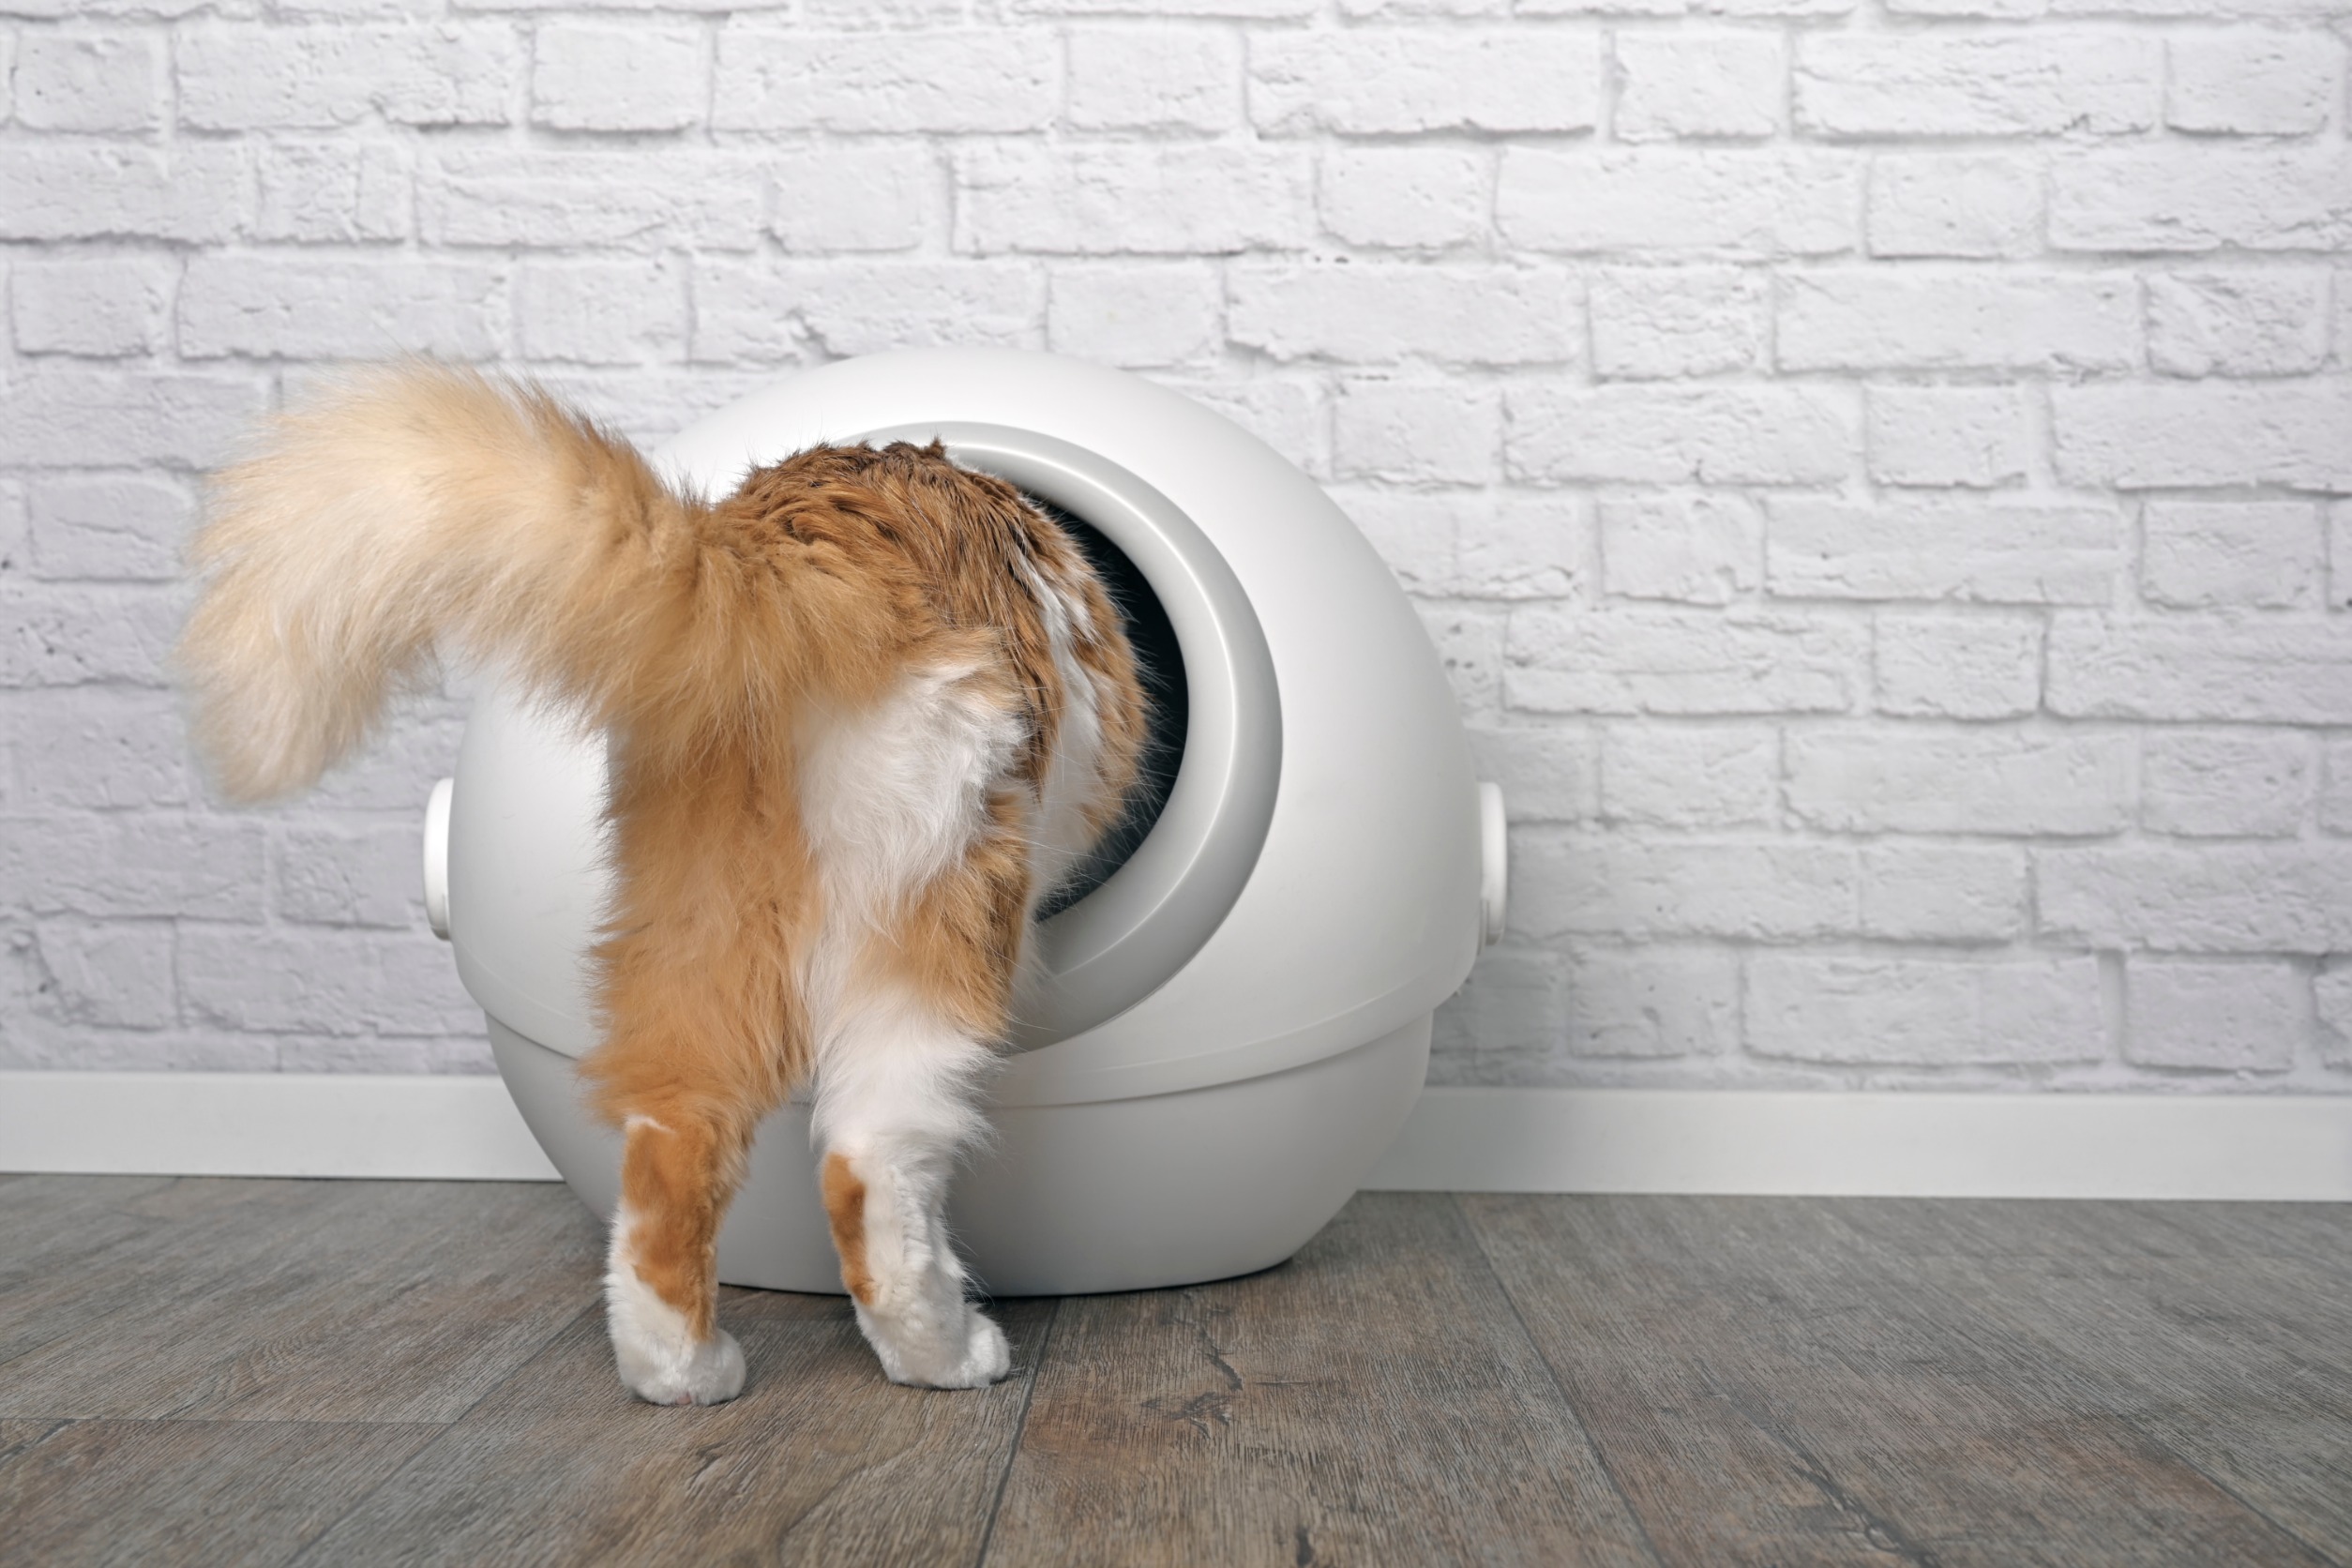 Are Automatic Litter Boxes Good?